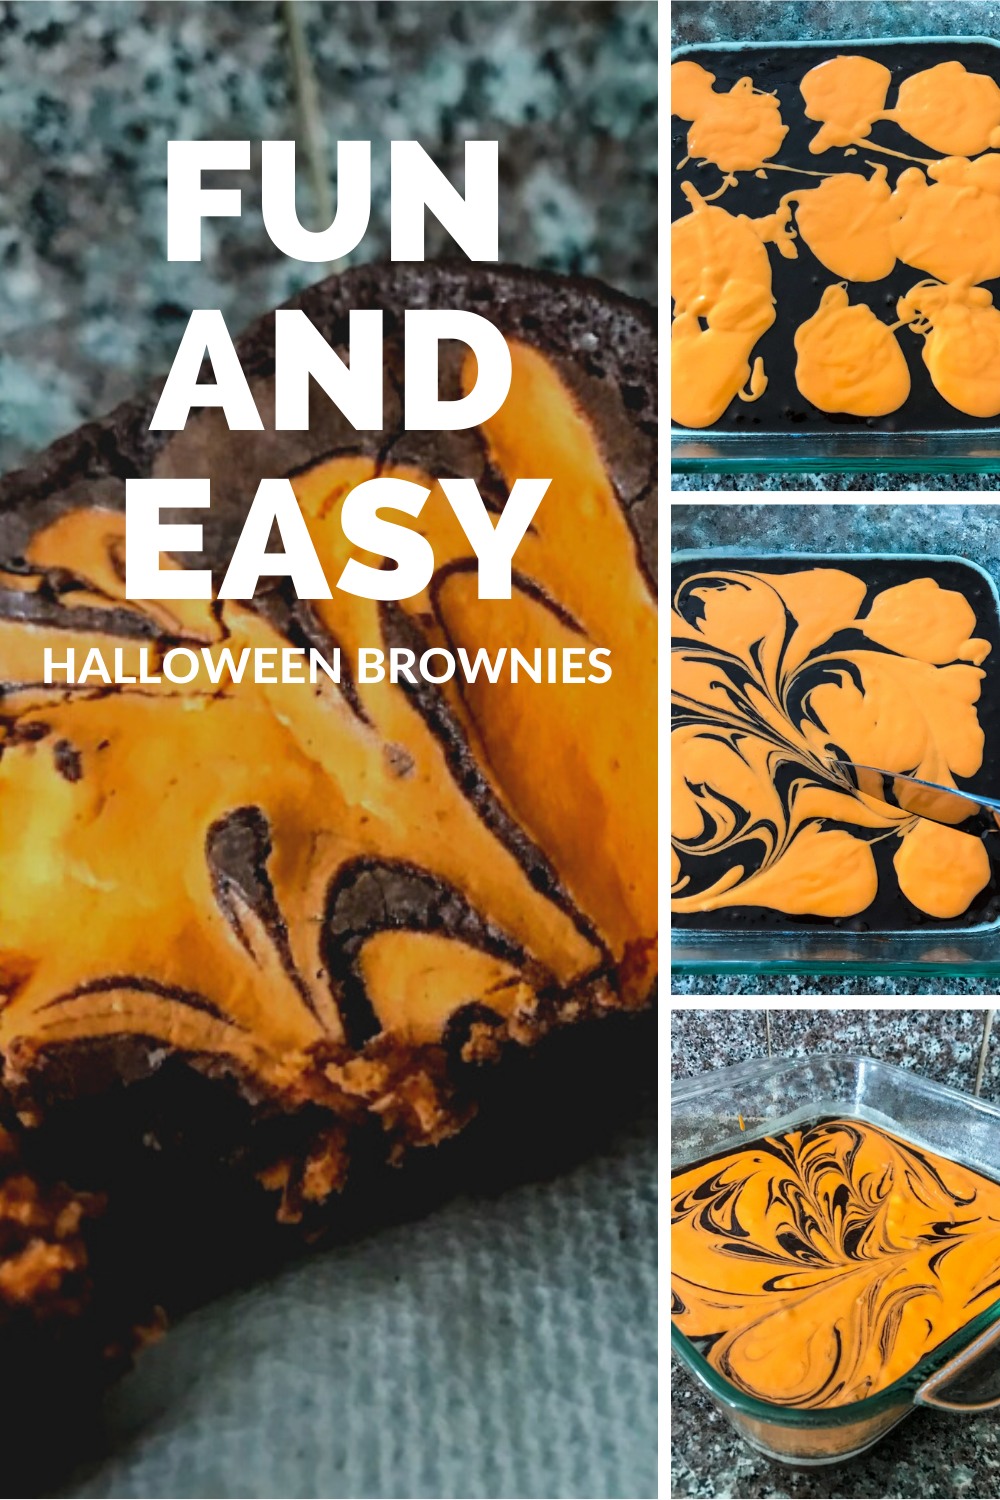 How to Make a Fun and Easy Halloween Dessert | These Halloween-themed cheesecake brownies are a simple and easy dessert for kids, adults, and parties! It only takes a few minutes and ingredients to make a batch of these chocolate Halloween treats. #Halloween #Halloweendesserts #brownies #easyrecipe #halloweenparty